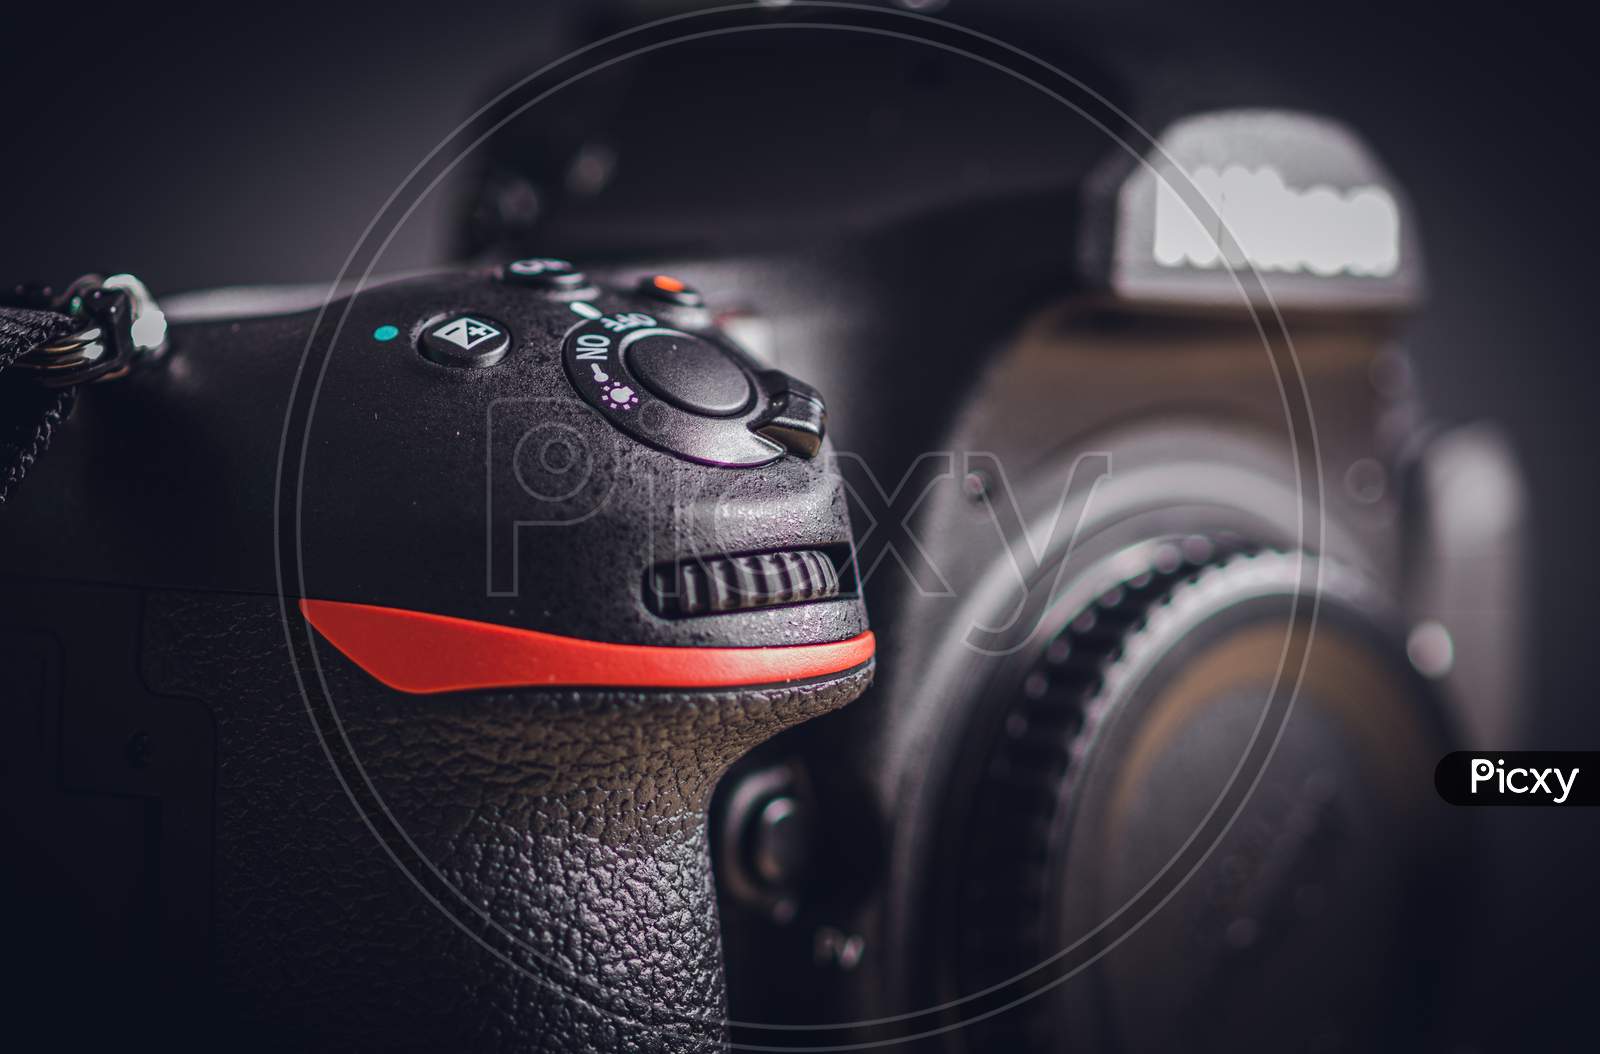 Professional Build Quality Modern Dslr And Front Buttons Close Up, Built With Rugged Magnesium Alloy And Carbon Fiber Materials, A Sturdy Camera With Flagship Technology,